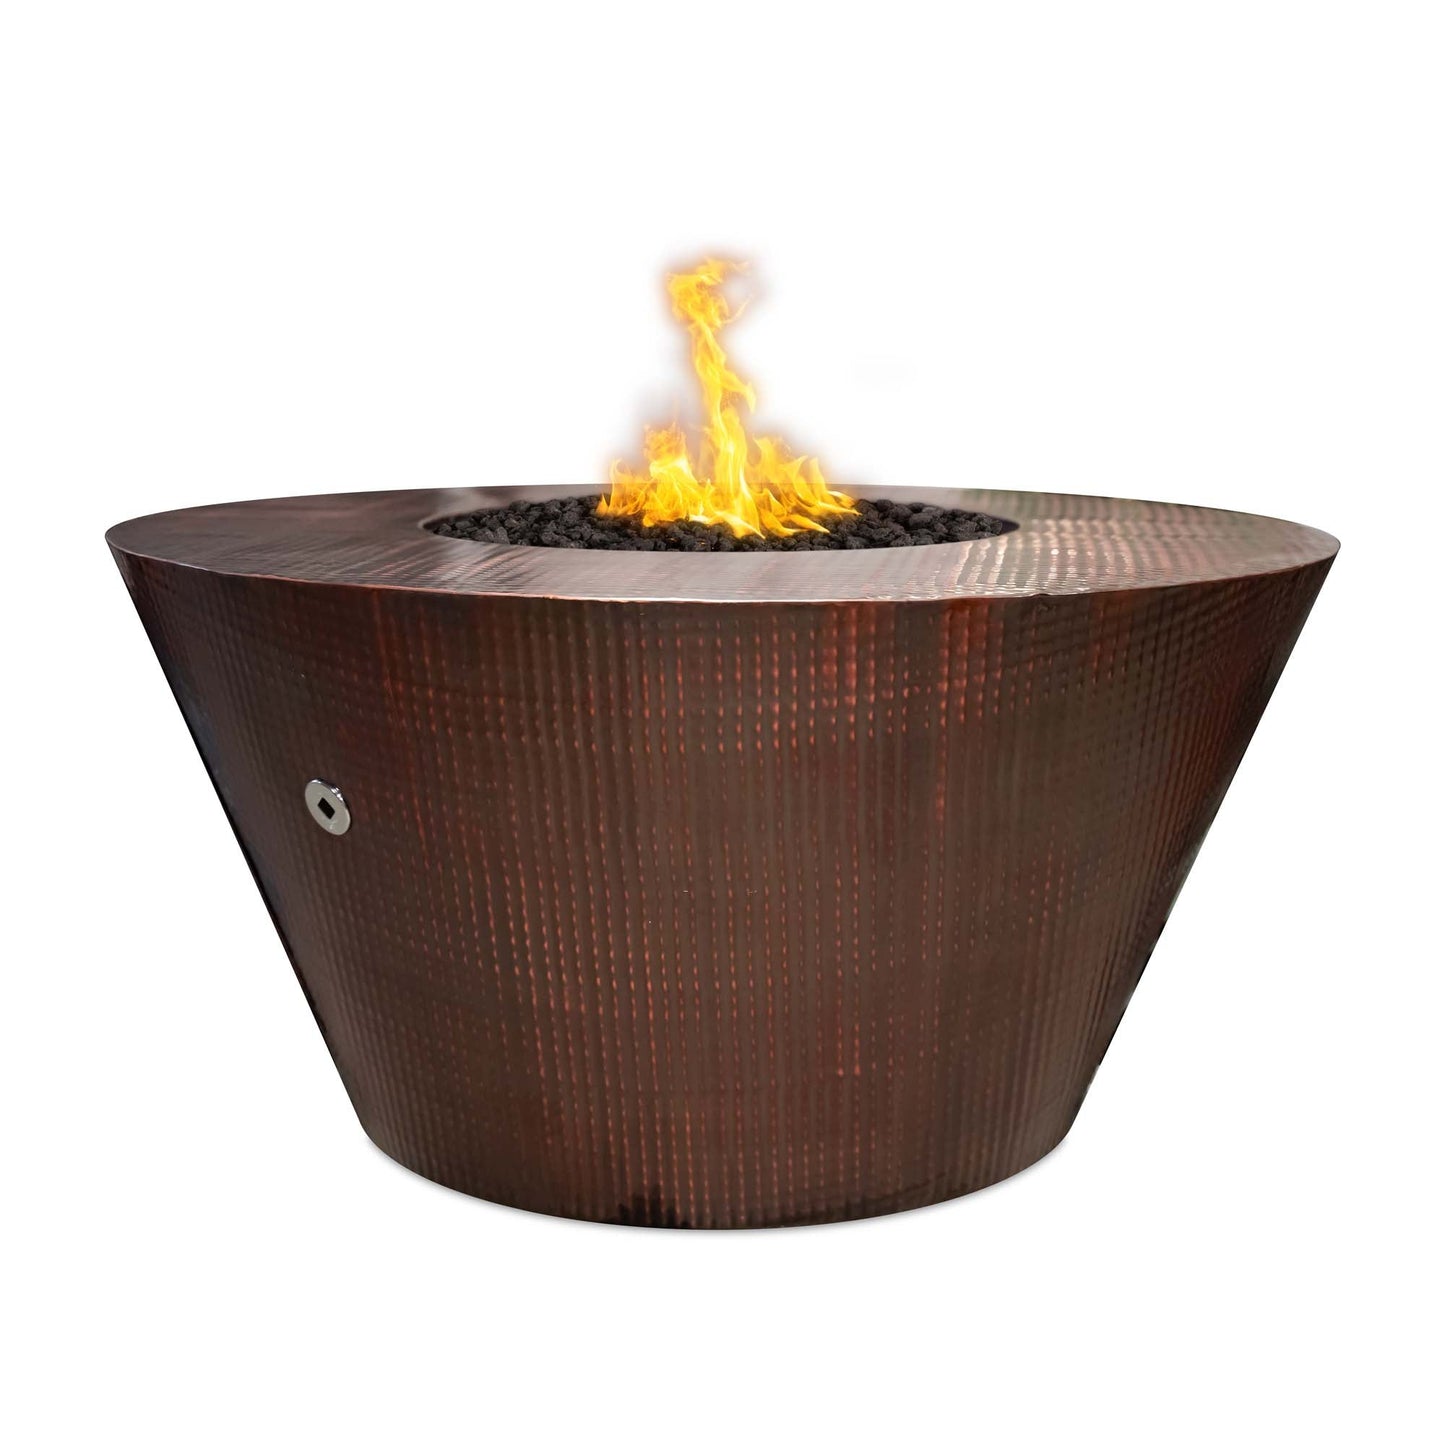 The Outdoor Plus Round Martillo 48" Corten Steel Liquid Propane Fire Pit with Flame Sense with Spark Ignition